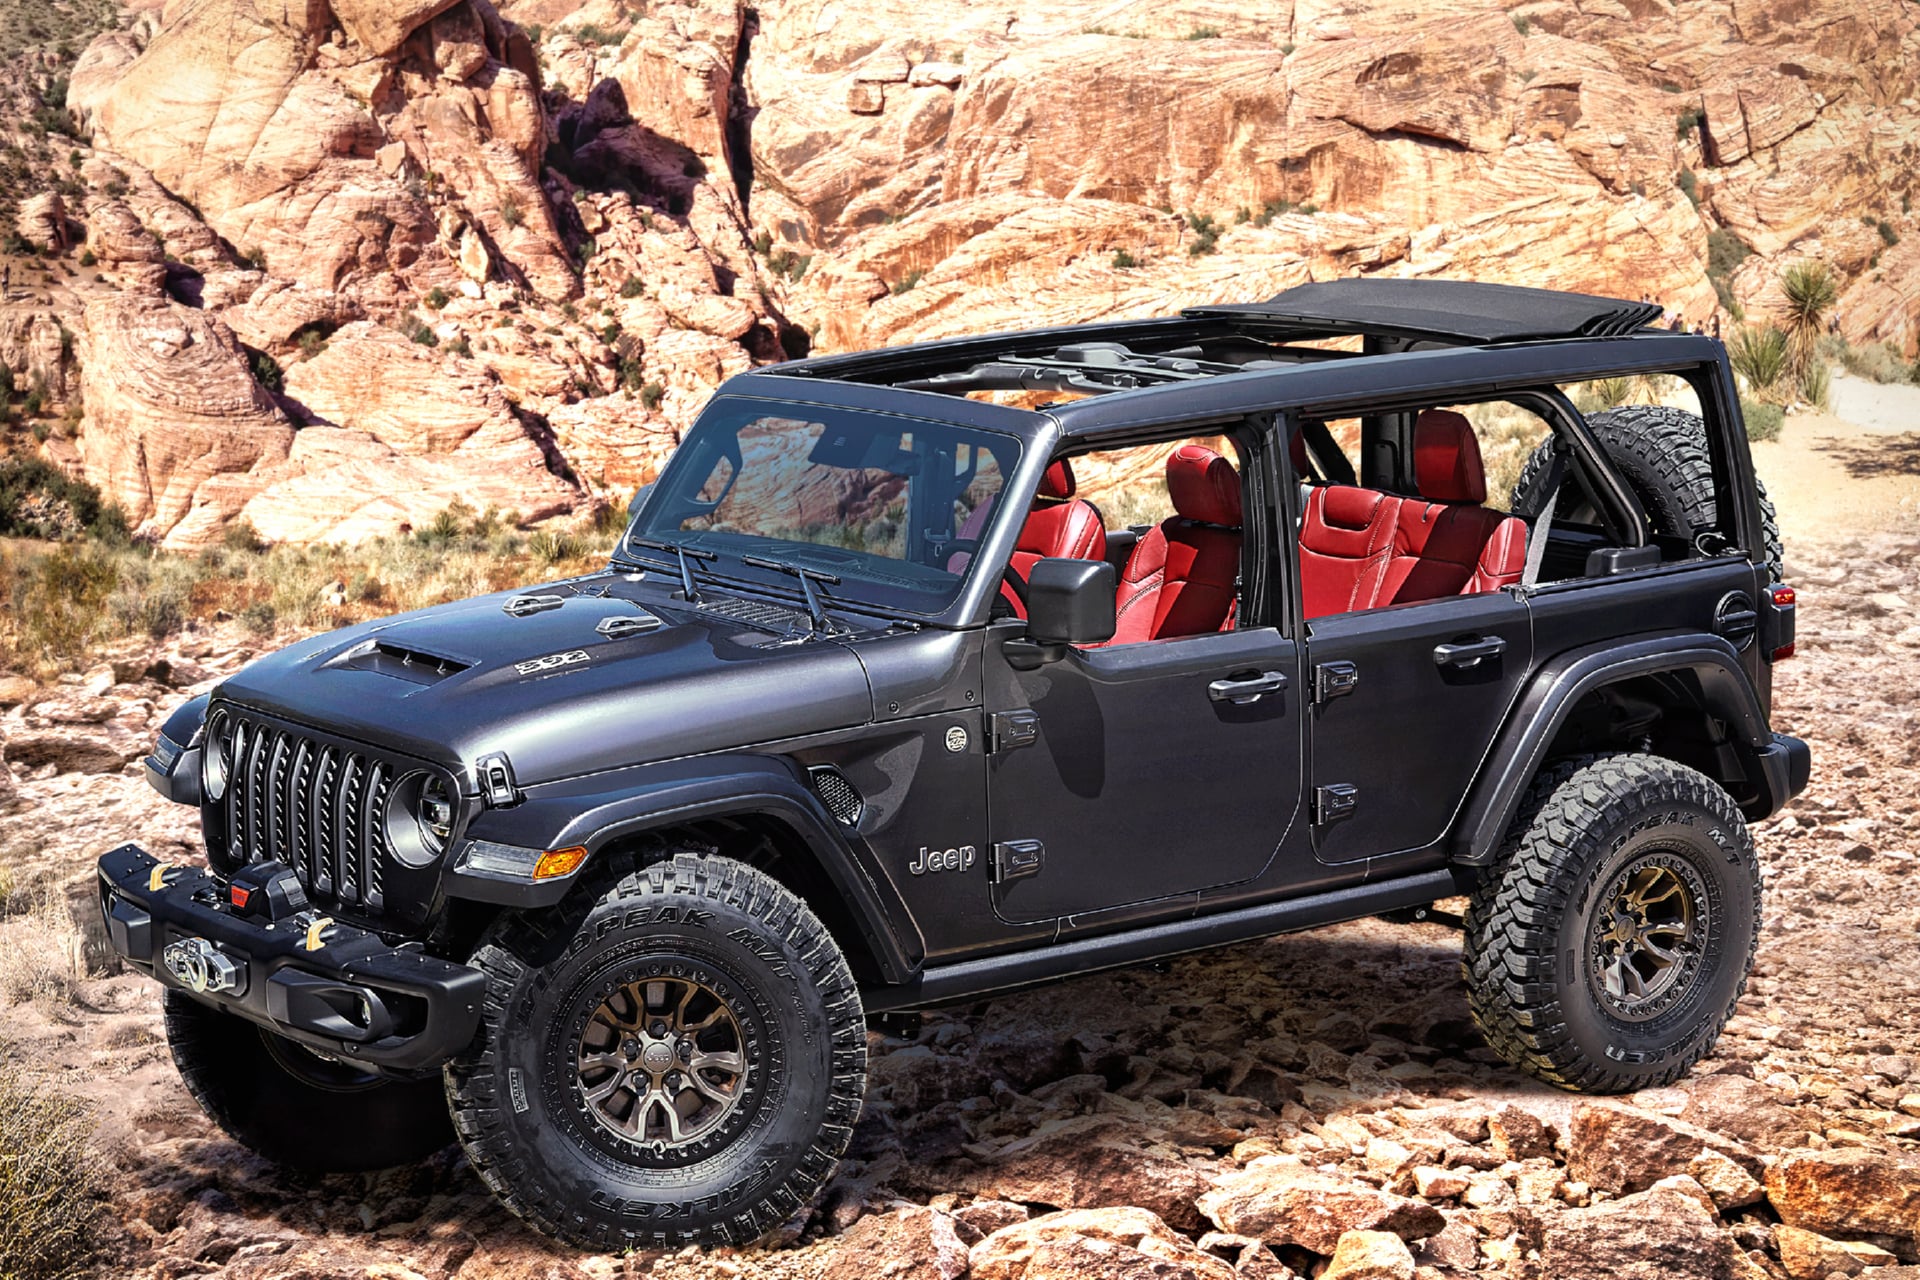 Jeep Wrangler Rubicon 392 Concept wallpapers HD quality